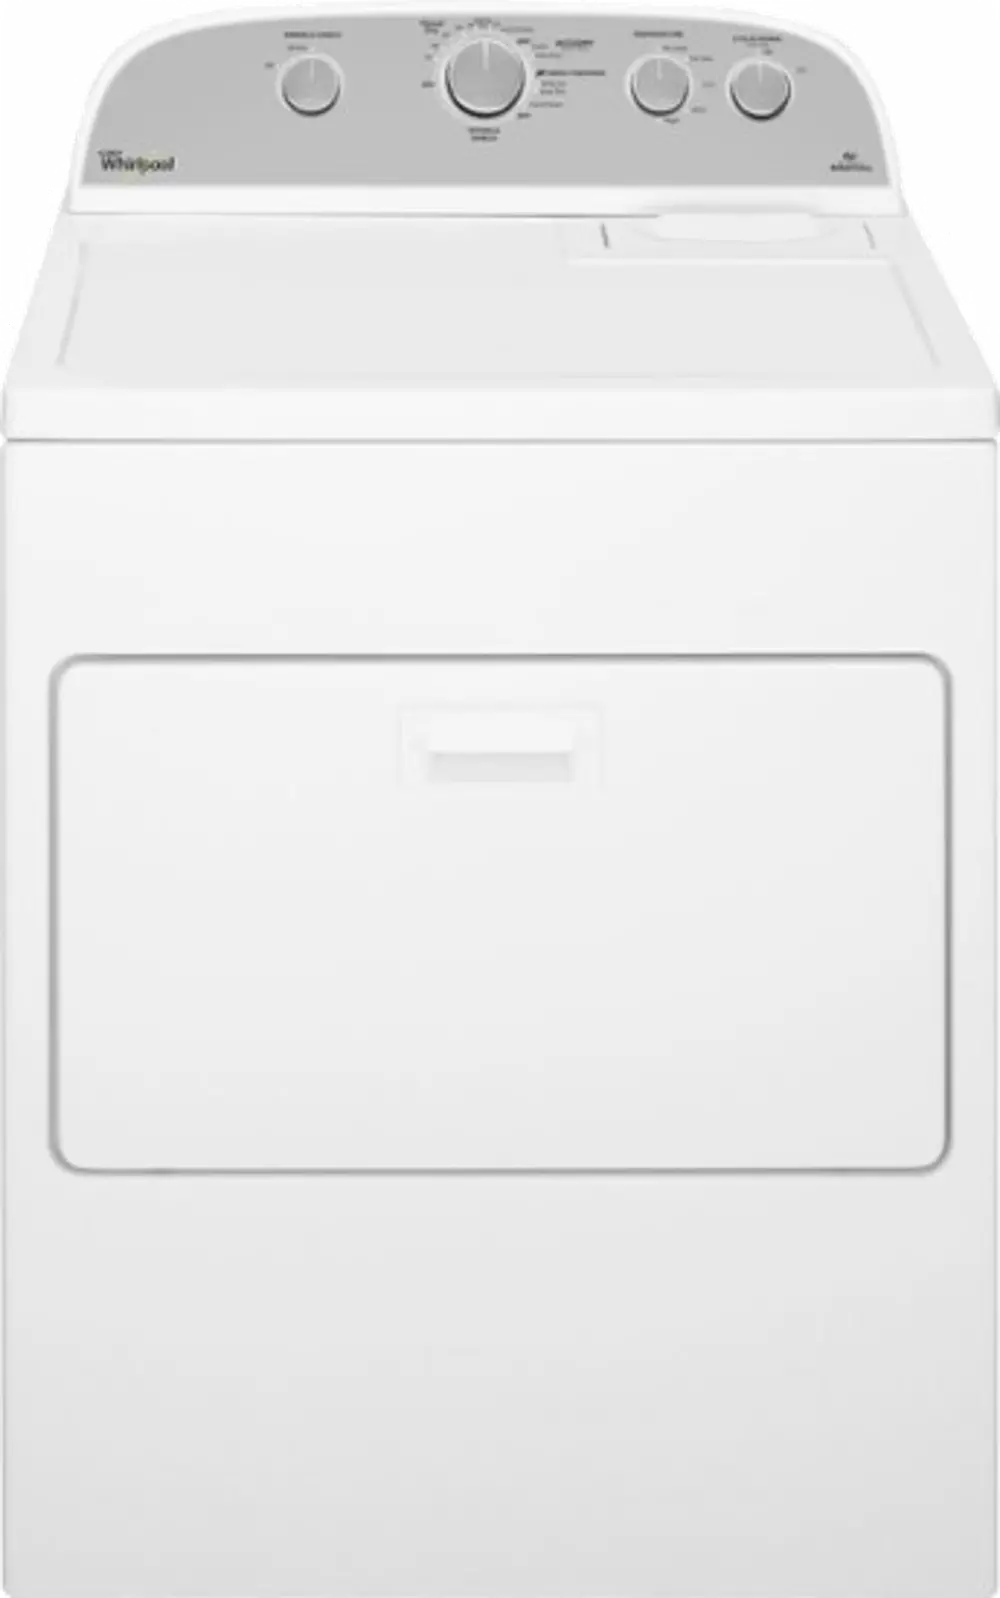 WED4915EW Whirlpool White 7.0 cu. ft. Electric Dryer-1